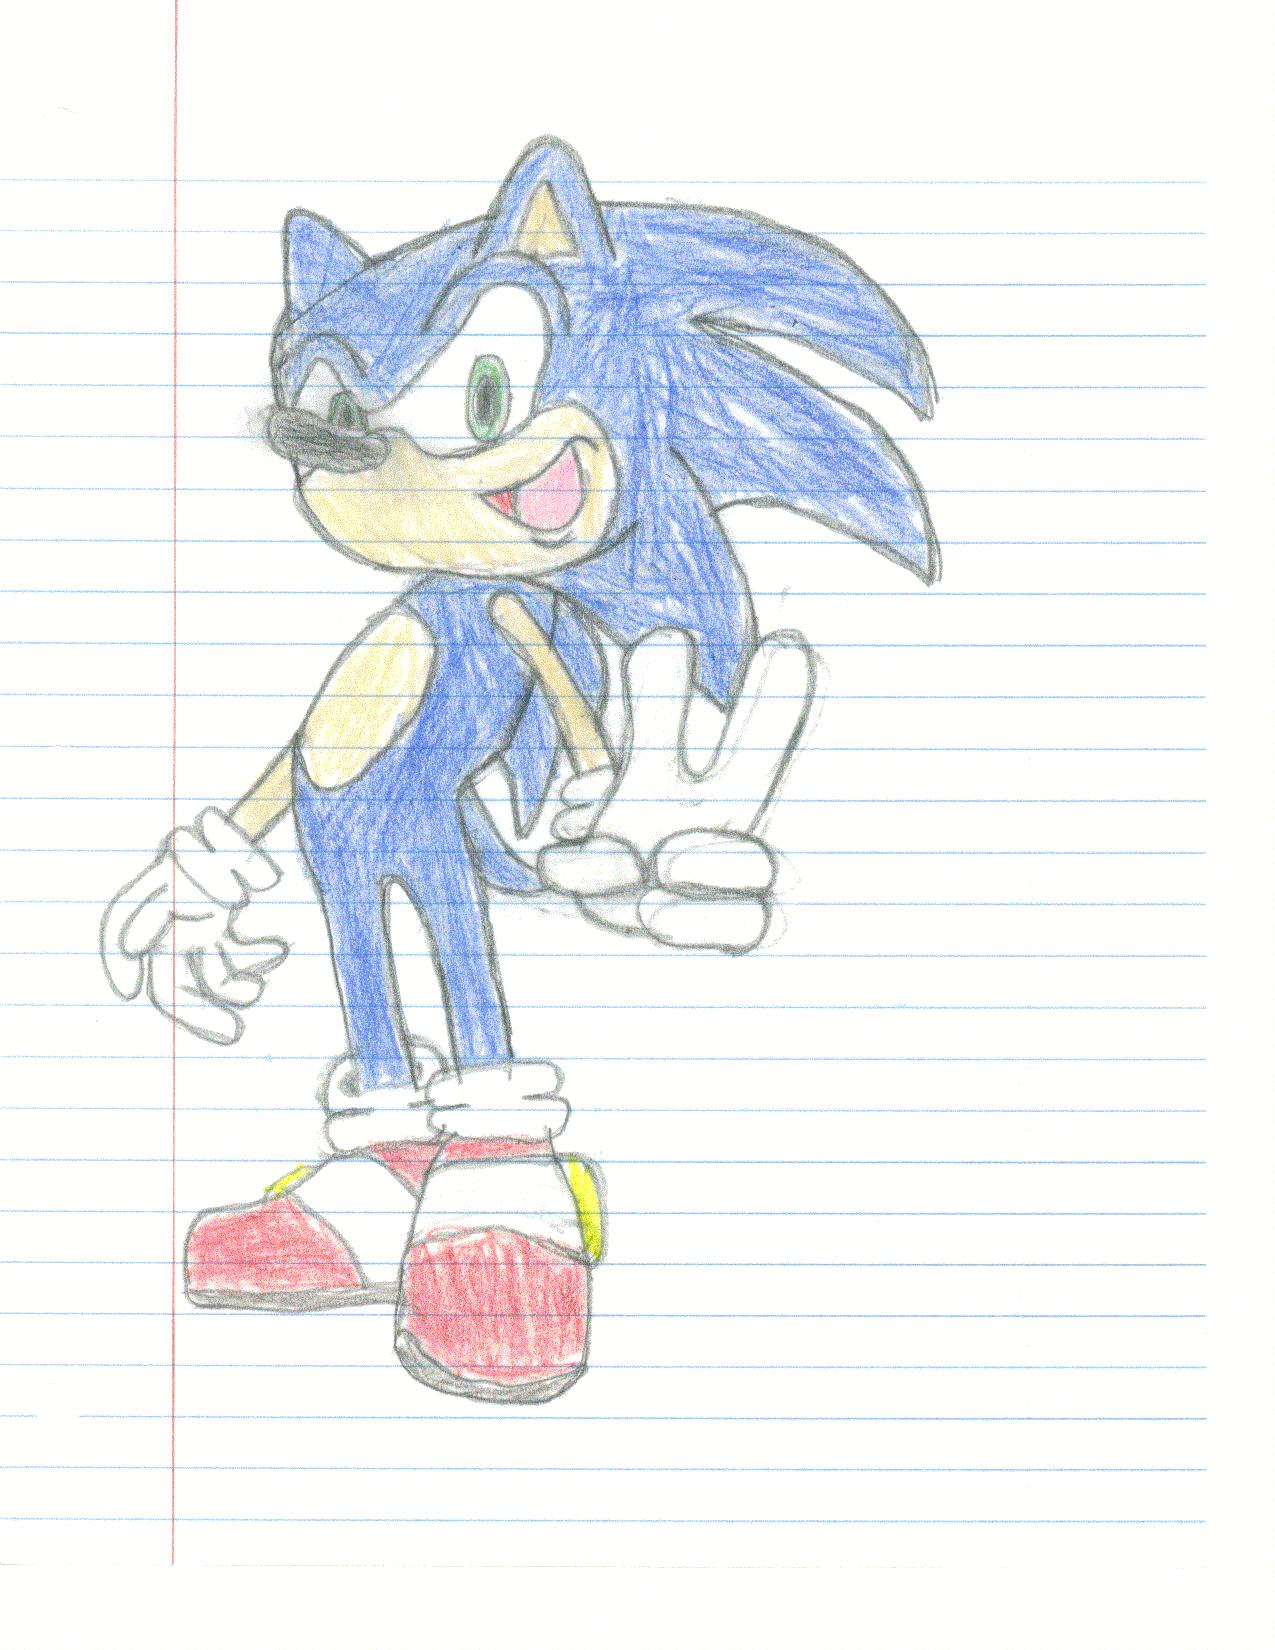 Sonic The Hedgehog by Acid512